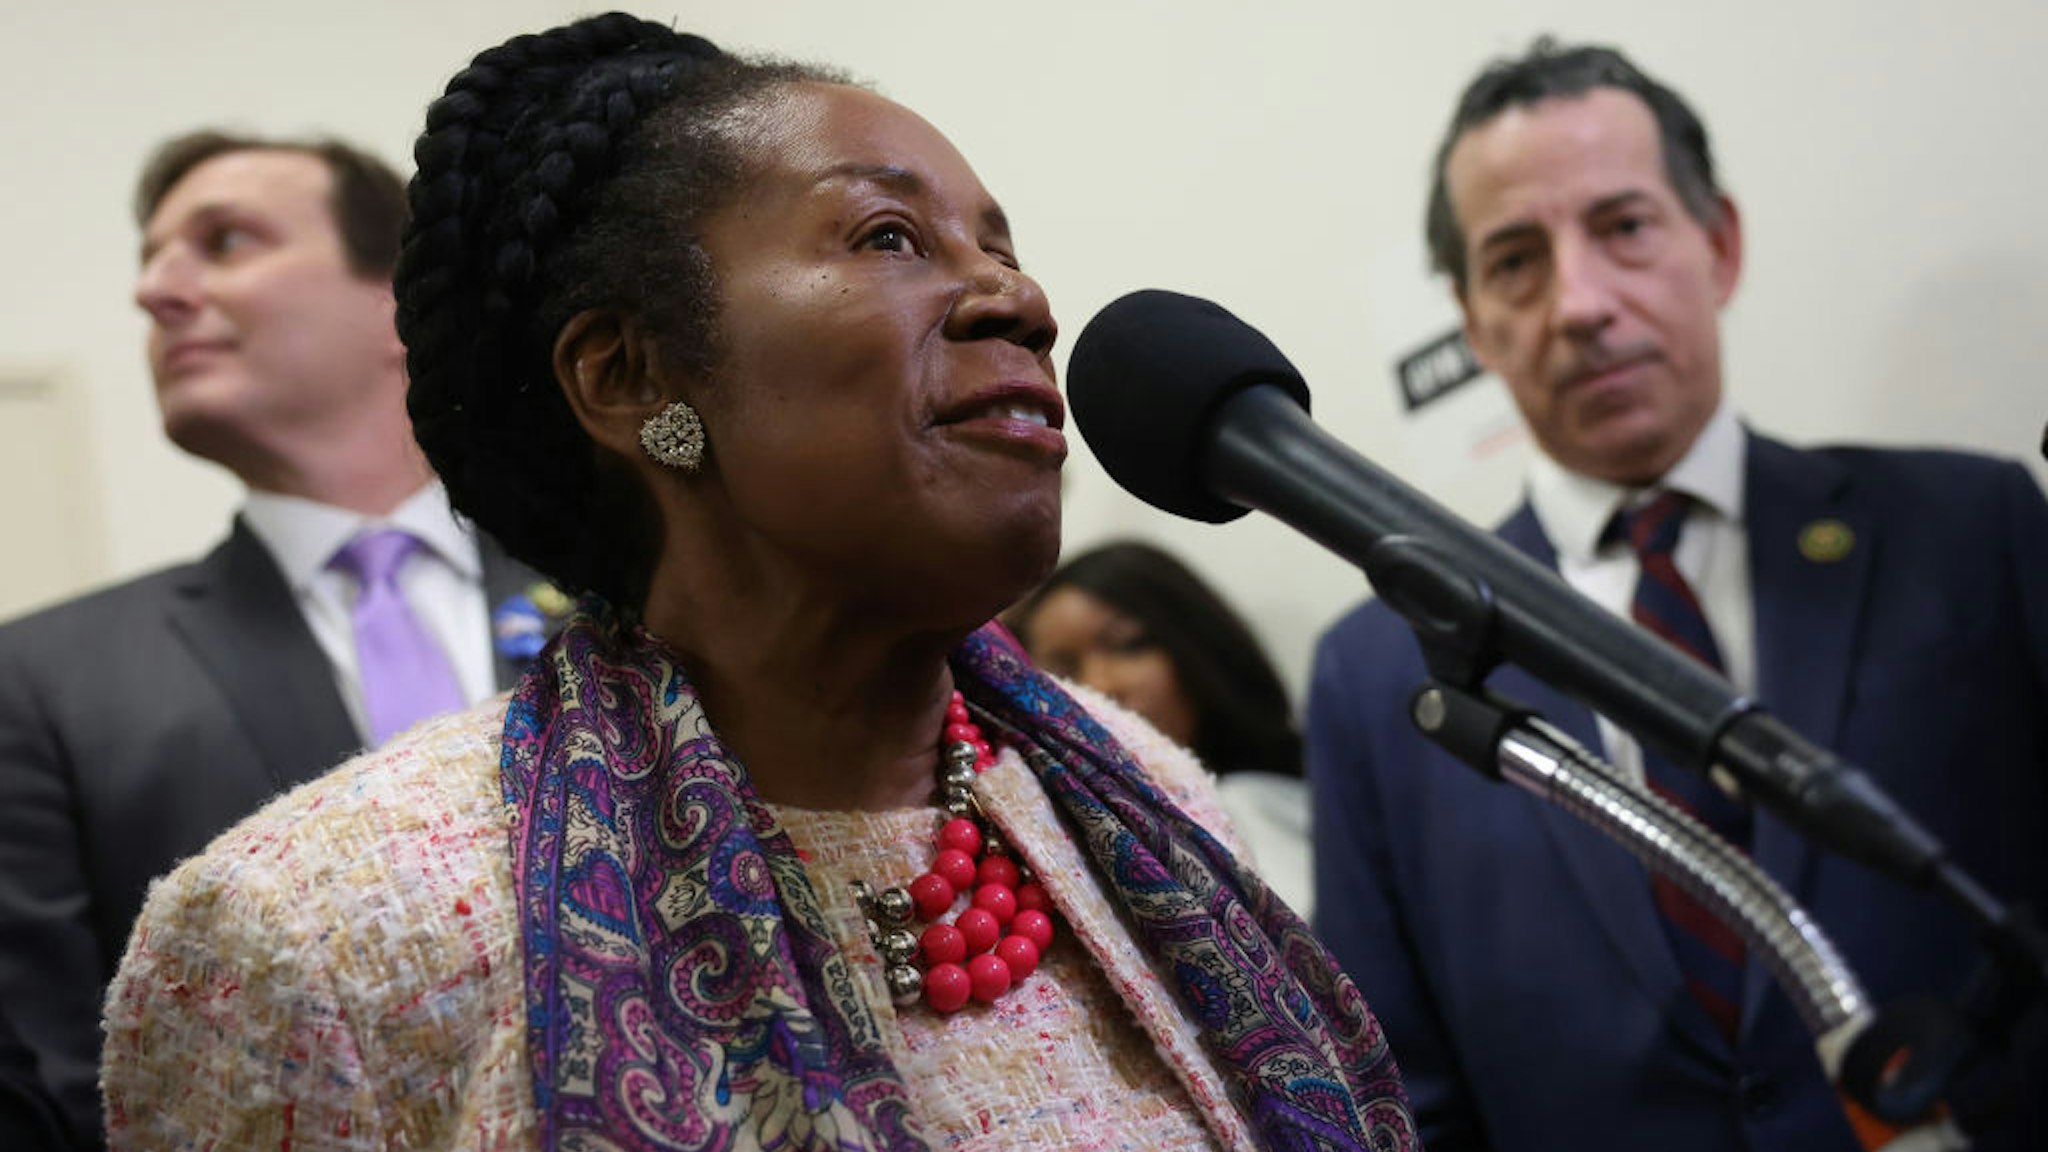 WASHINGTON, DC - DECEMBER 13: U.S. Rep. Sheila Jackson Lee (D-TX) speaks to reporters as she is joined by fellow House Democrats in the Rayburn House Office Building on December 13, 2023 in Washington, DC. U.S. President Joe Biden's son Hunter Biden defied a subpoena from Congress to testify behind closed doors ahead of a House vote on an impeachment inquiry against his father. (Photo by Kevin Dietsch/Getty Images)